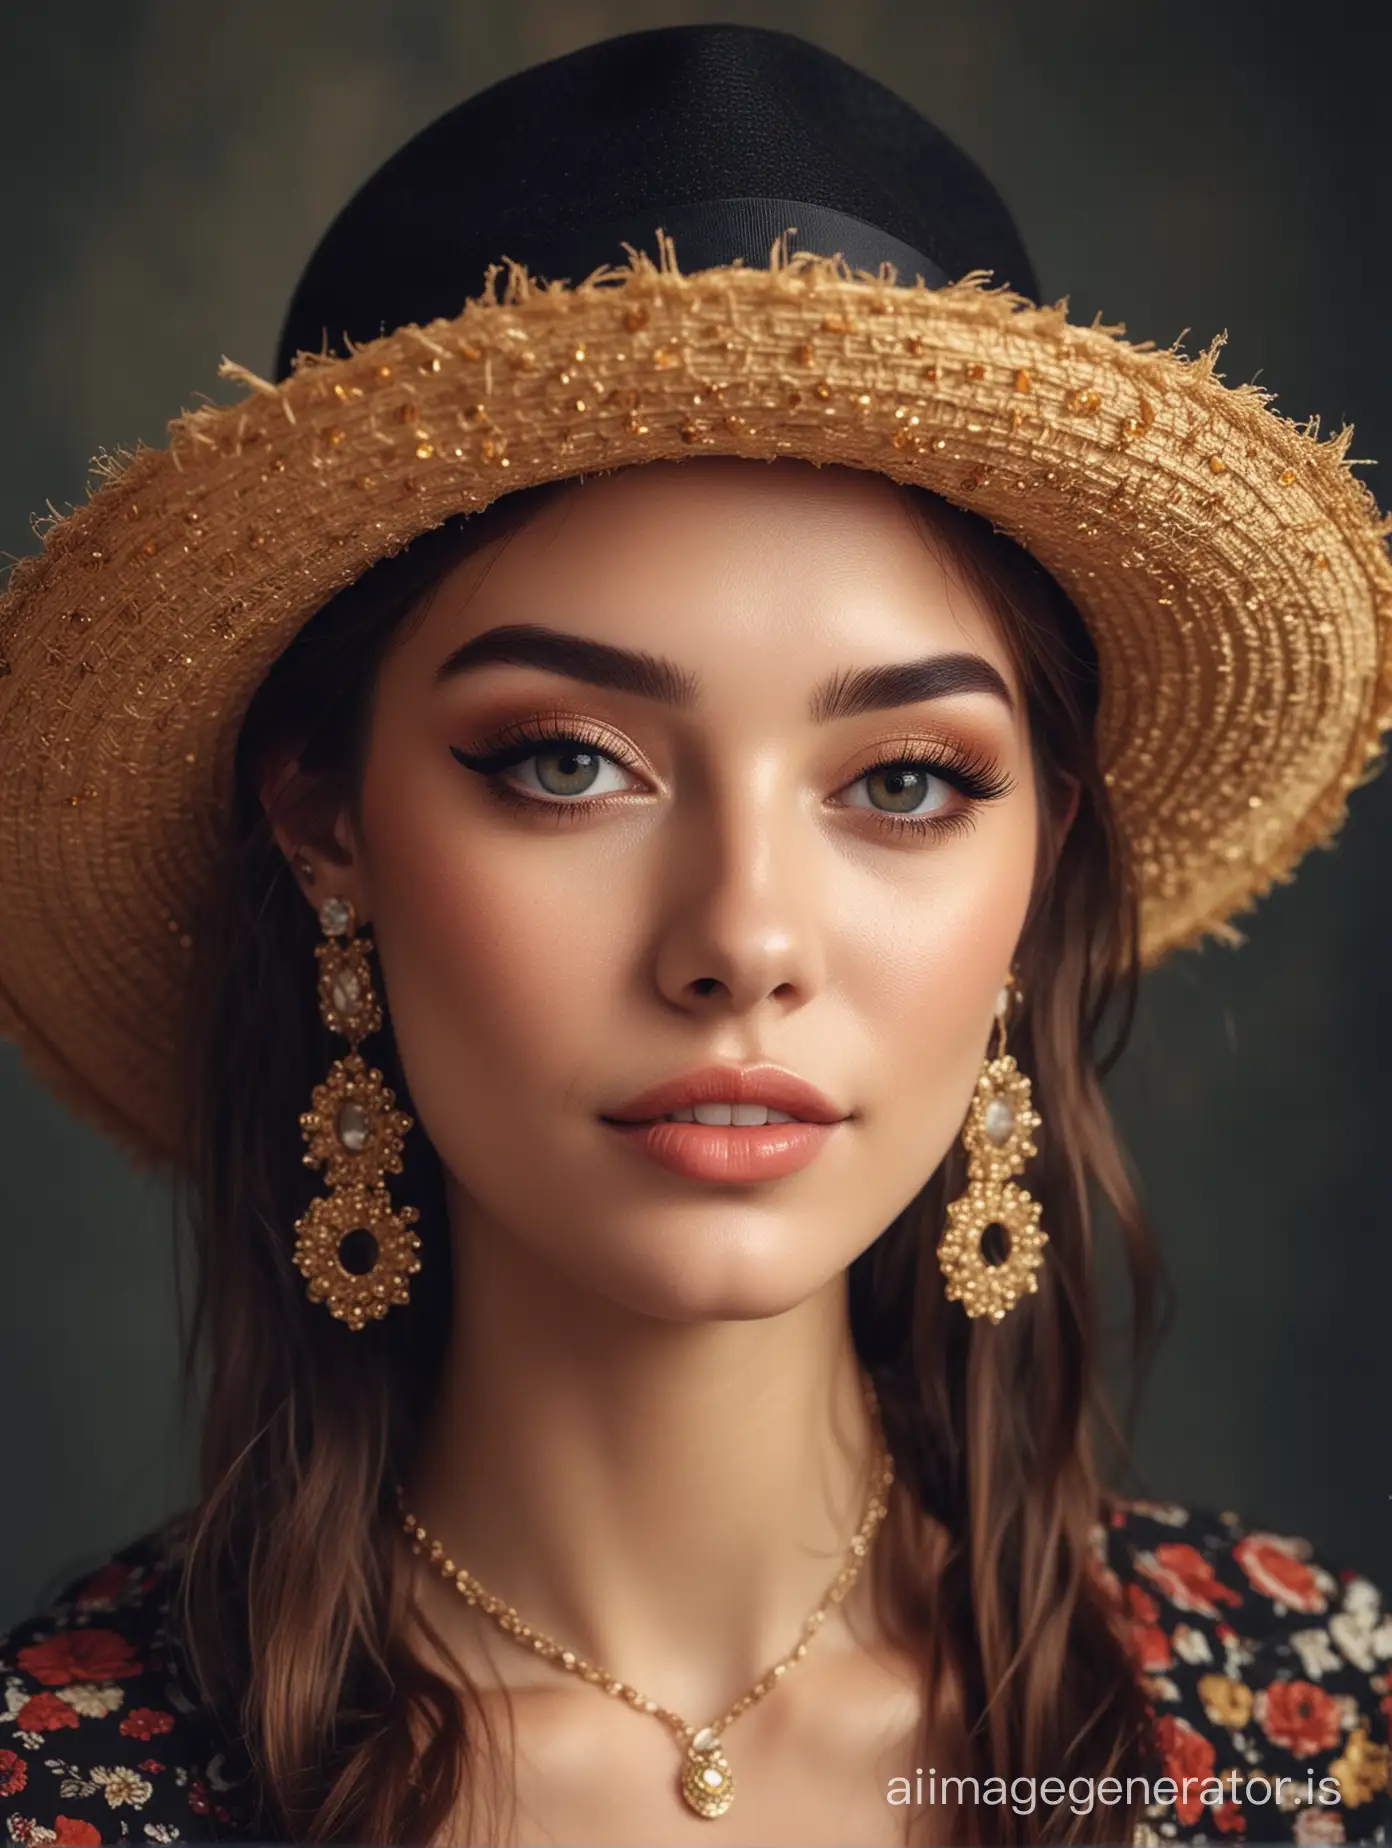 🌹 girl makeup, long false eyelashes, cunning smile, in a hat, earrings, honeycore, Dolce & Gabbana, beauty aesthetic girl, glam design, party, high resolution, depth of field, triple exposure, grunge textures, VSCO Filter,